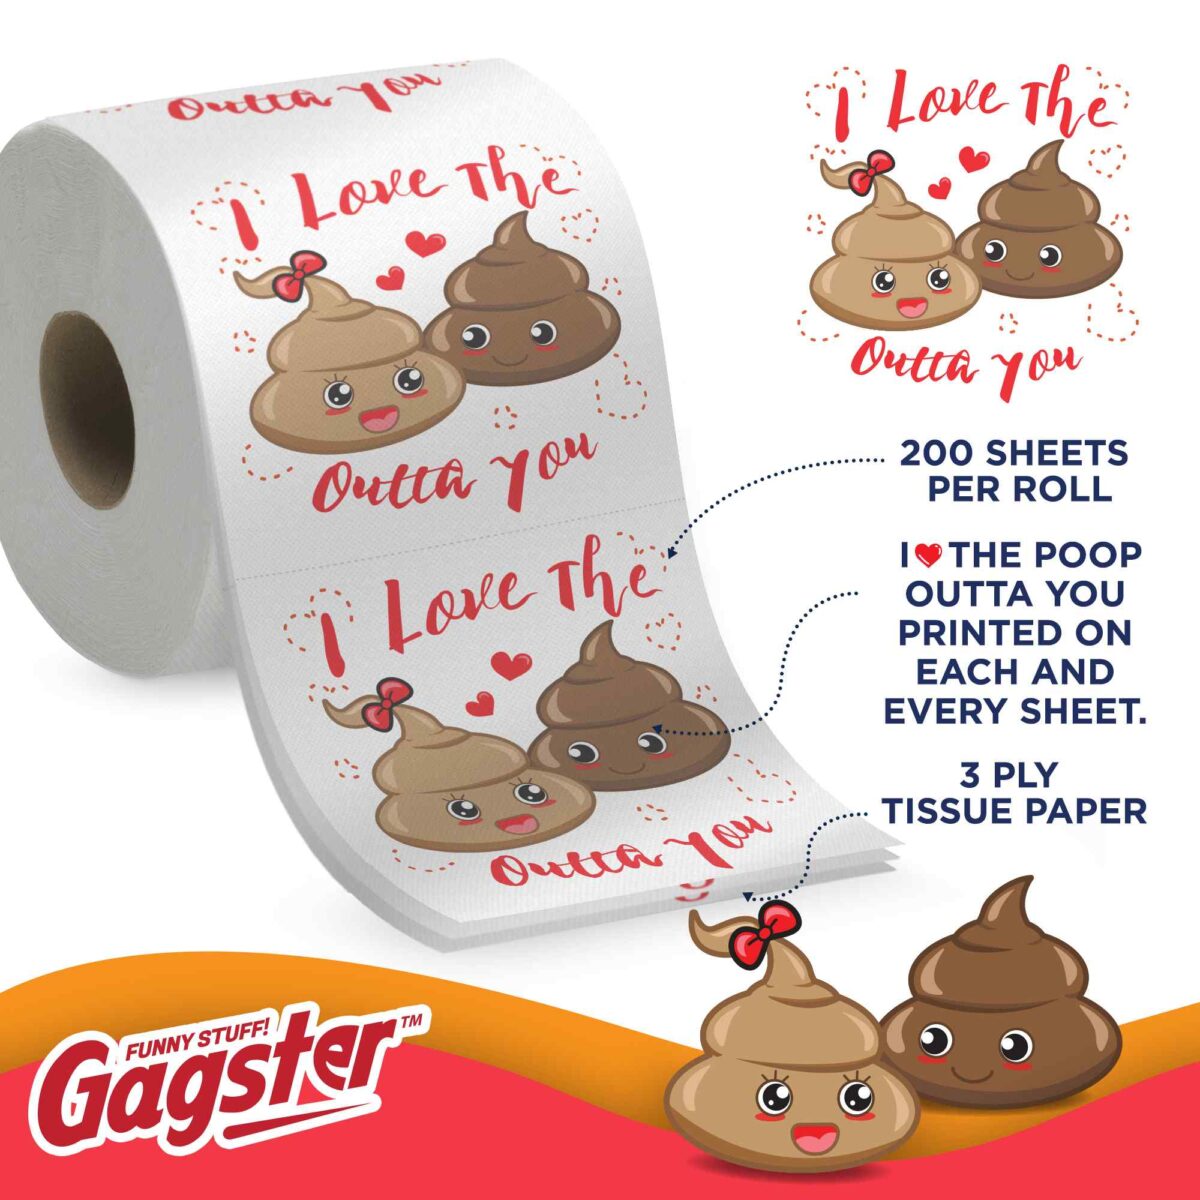 valentines toilet paper bathroom gifts for women funny i love you gifts toilet paper gag gift valentines day funny toilet paper funny anniversary gifts for him valentines day gifts for teenagers cute valentine's day gifts for him valentines day funny